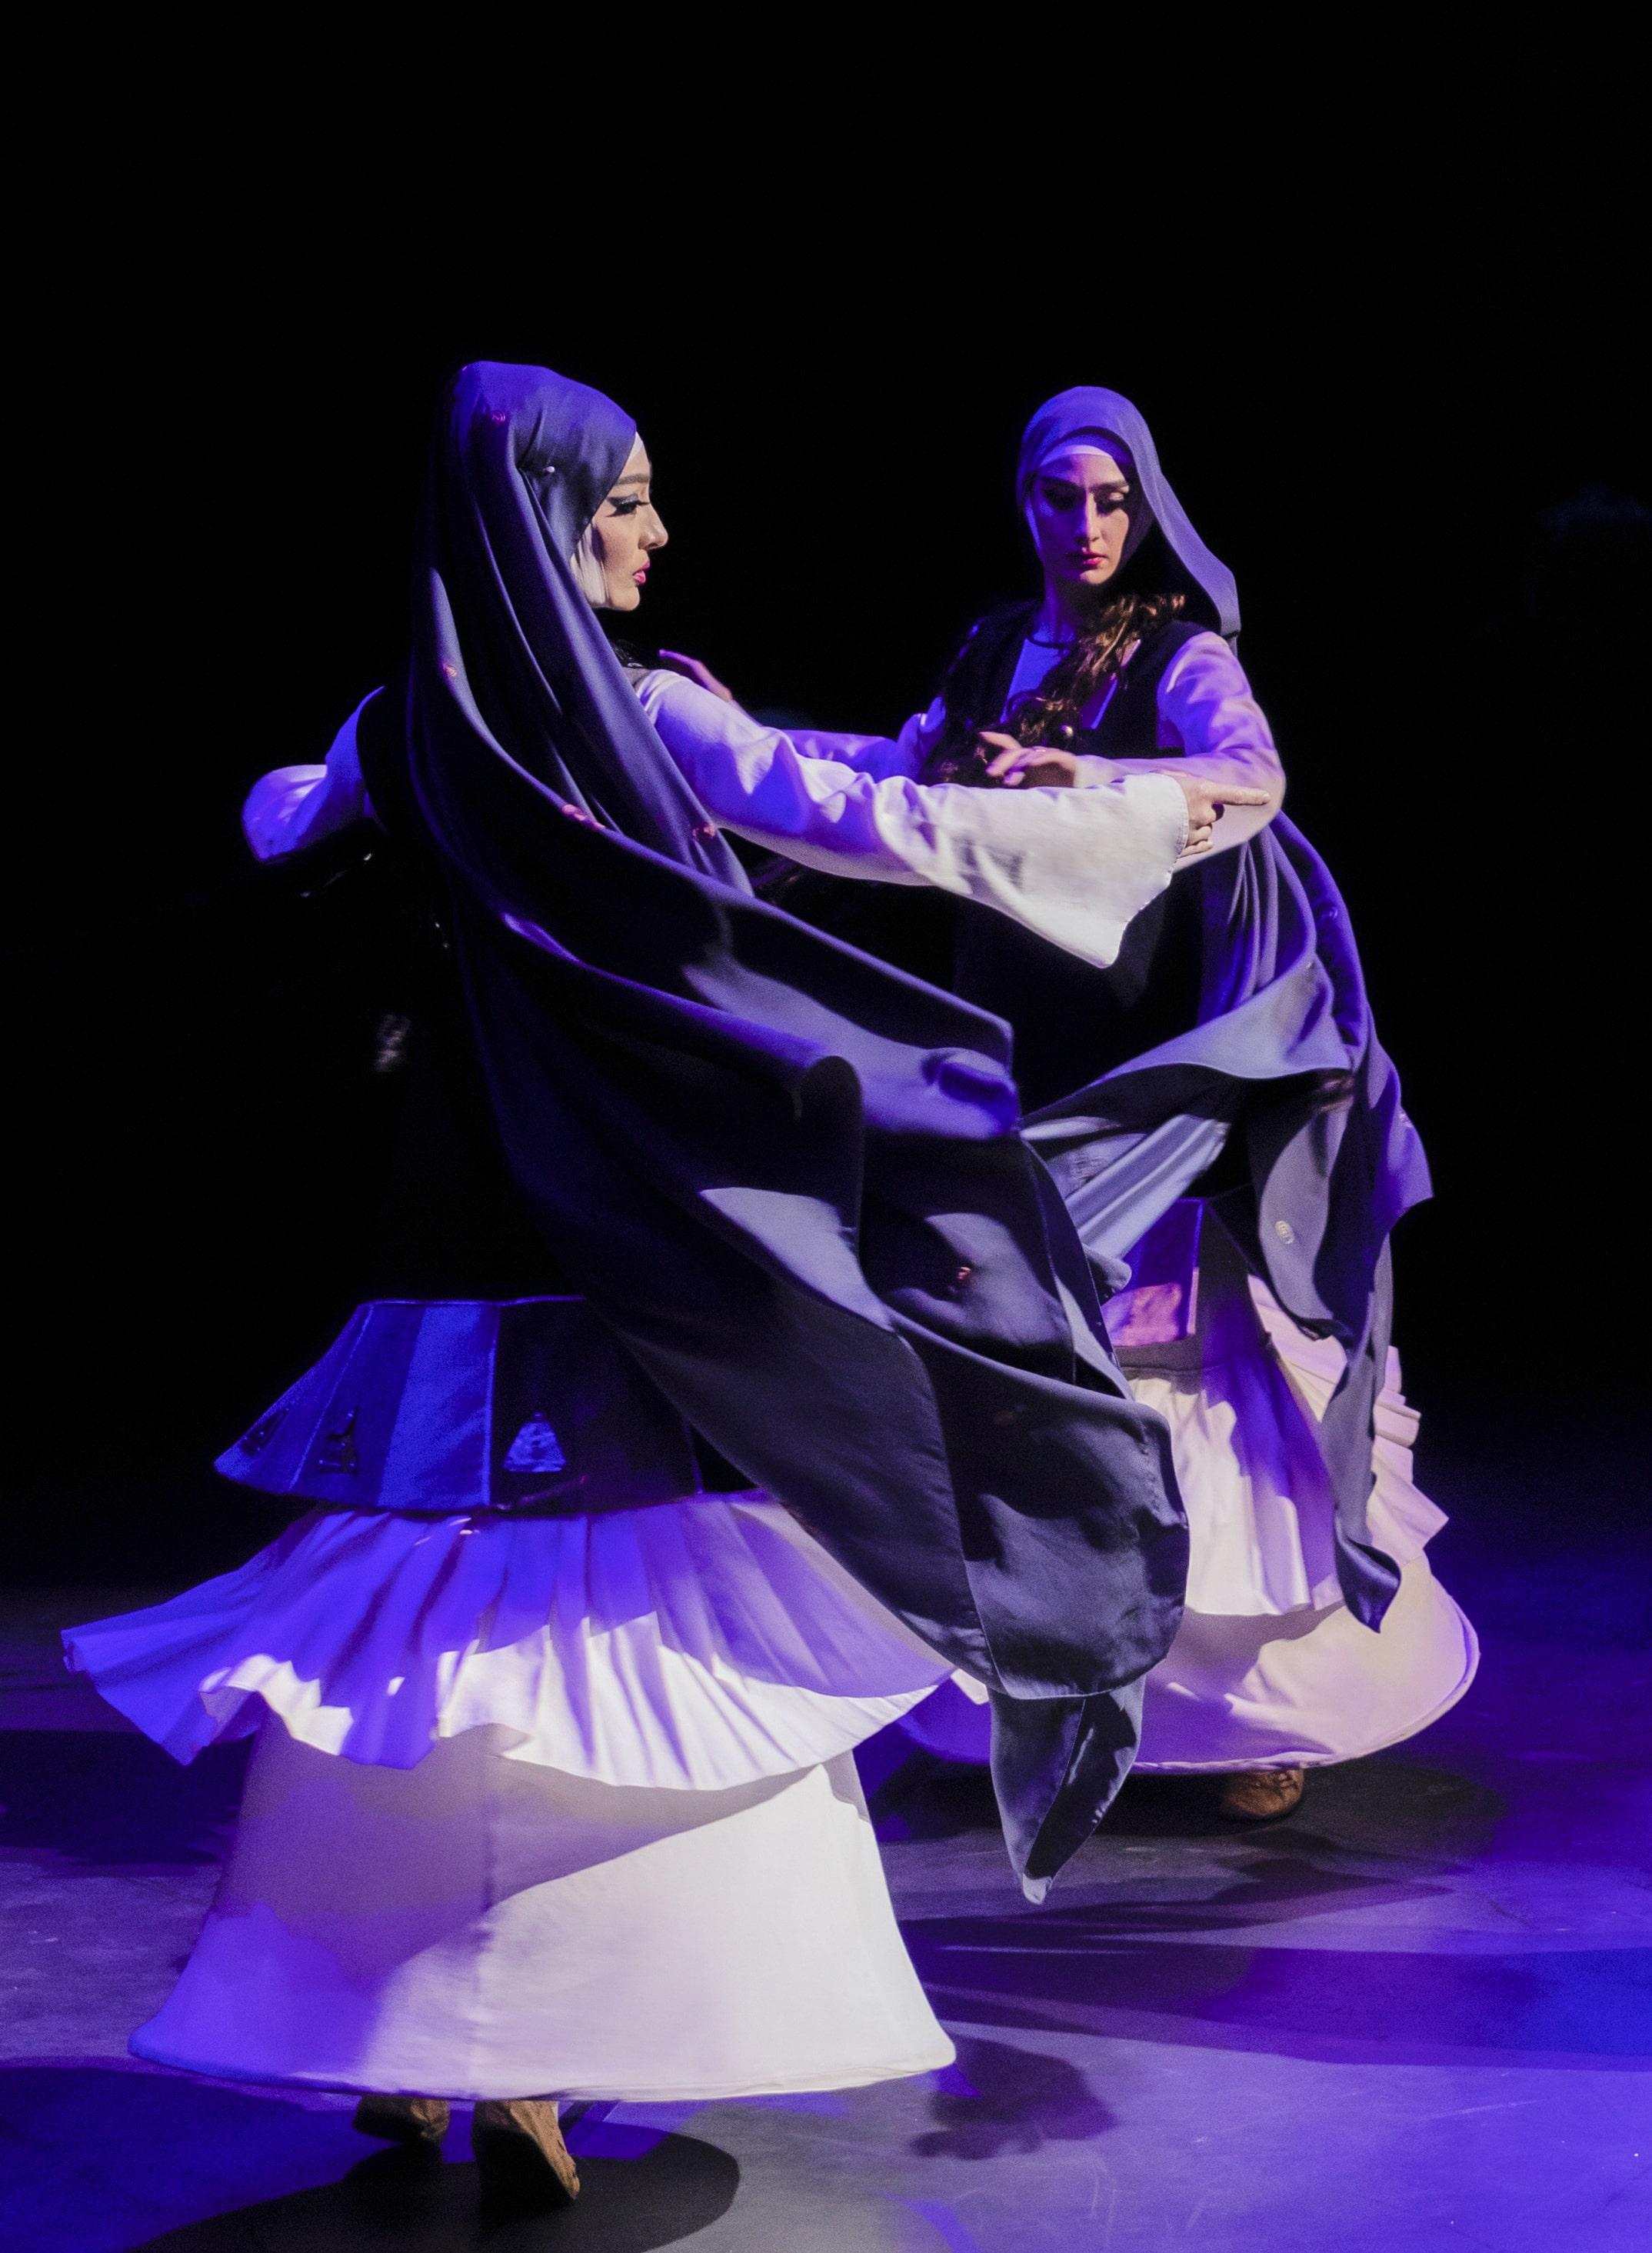 The Leisure and Cultural Services Department has invited the Georgian National Dance Company Sukhishvili to stage performances at the Sha Tin Town Hall on May 31 and June 1. Photo shows a scene from a past performance by the Georgian National Dance Company Sukhishvili.
